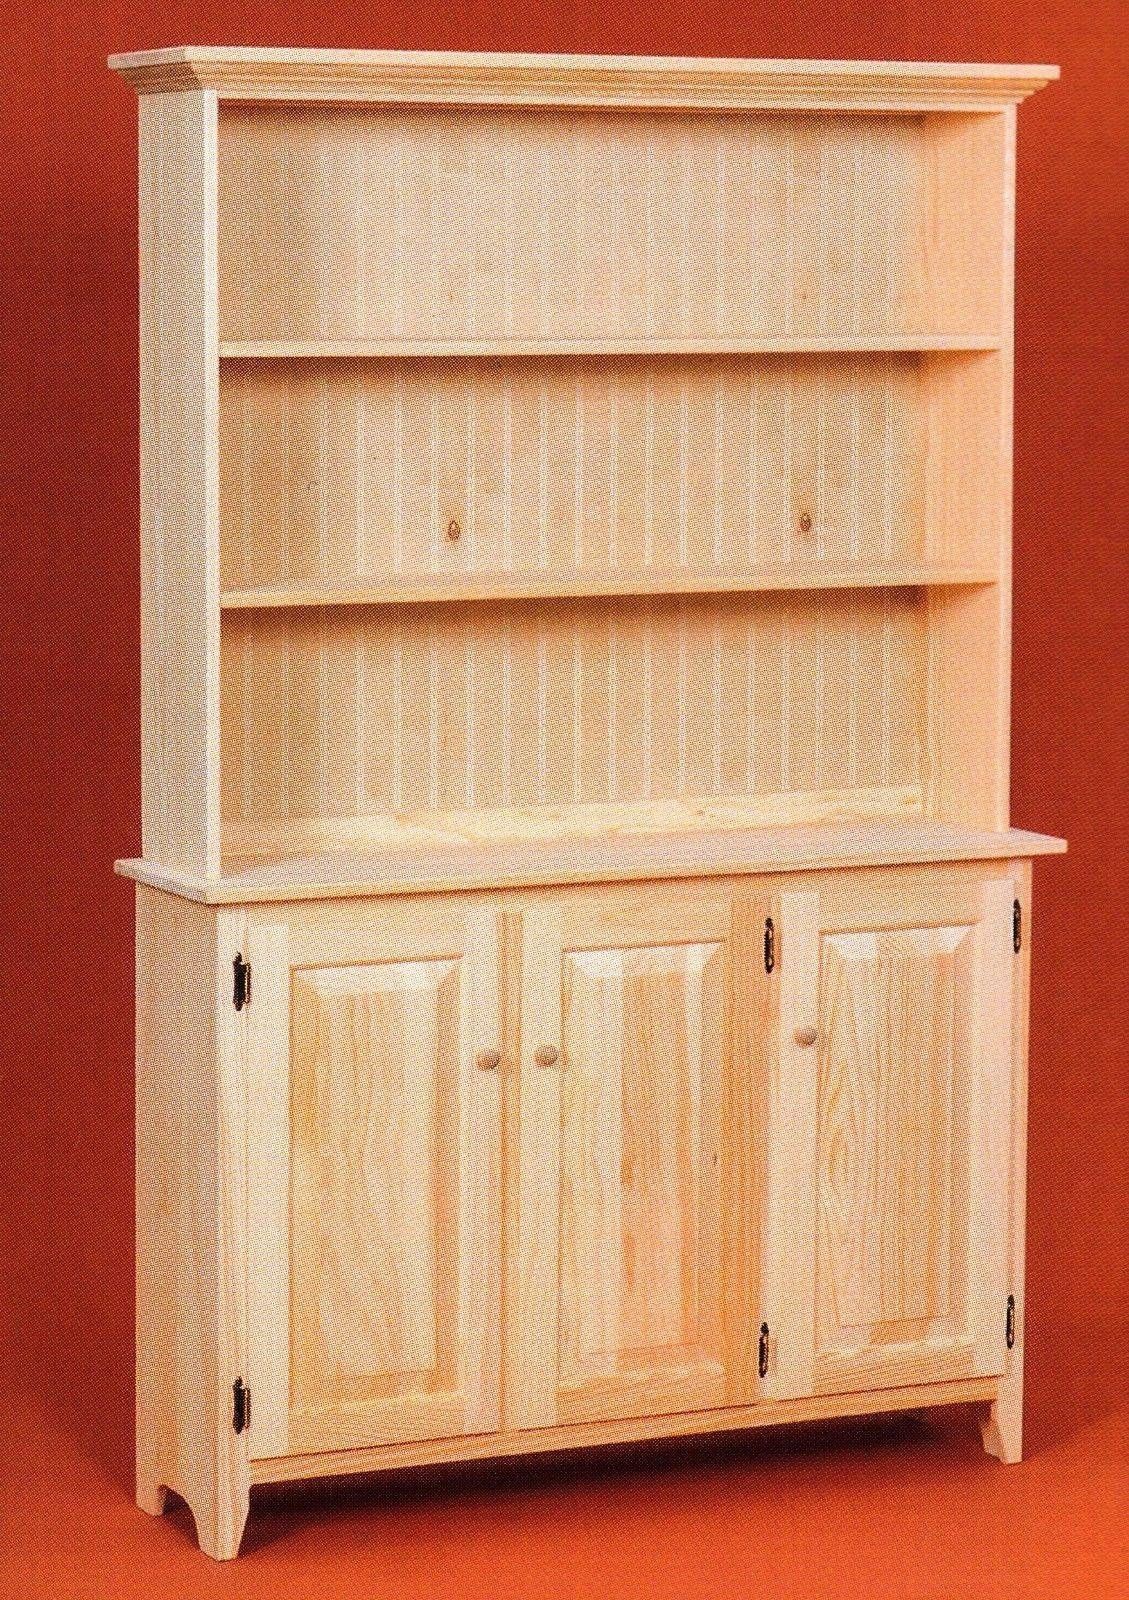 Amish Unfinished Solid Pine ~ Rustic Sideboard Buffet Storage Regarding Unfinished Sideboard (View 17 of 20)